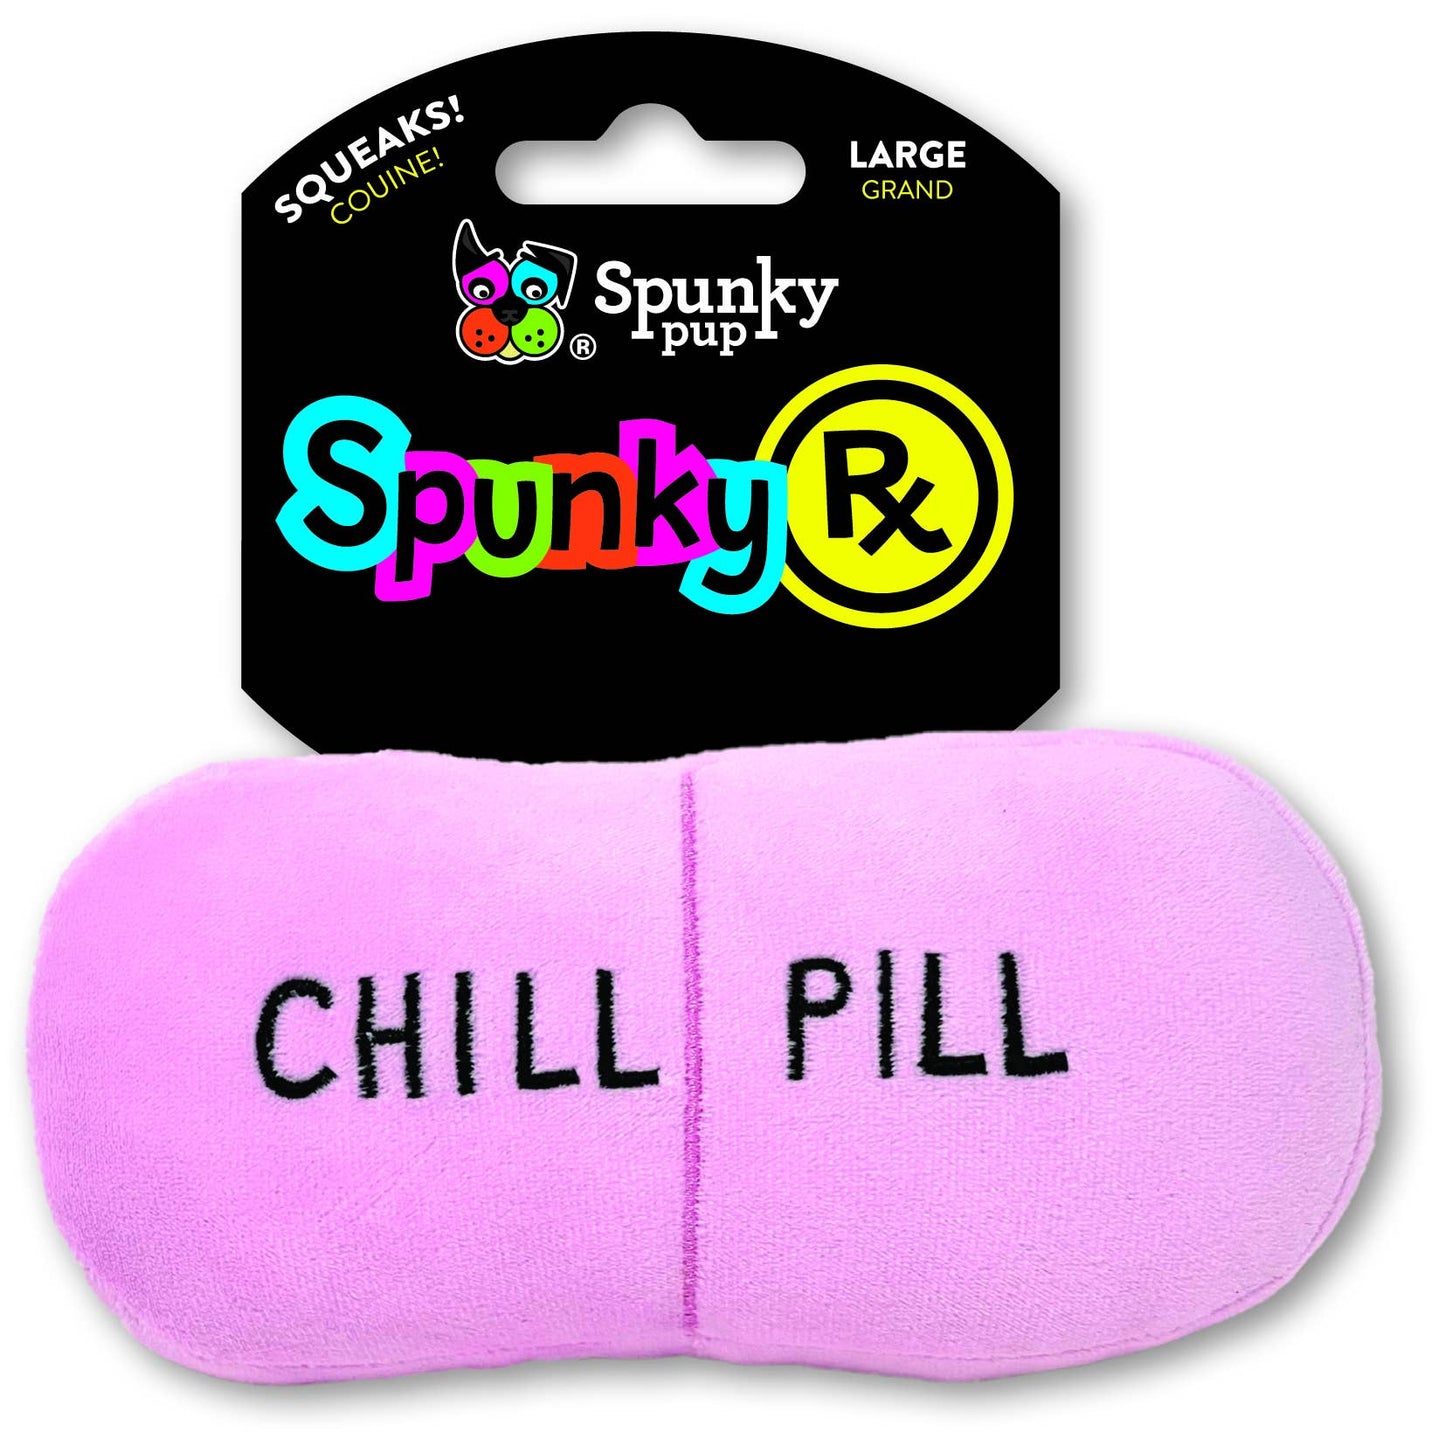 Spunky Rx Chill Pill Plush Toy  Image